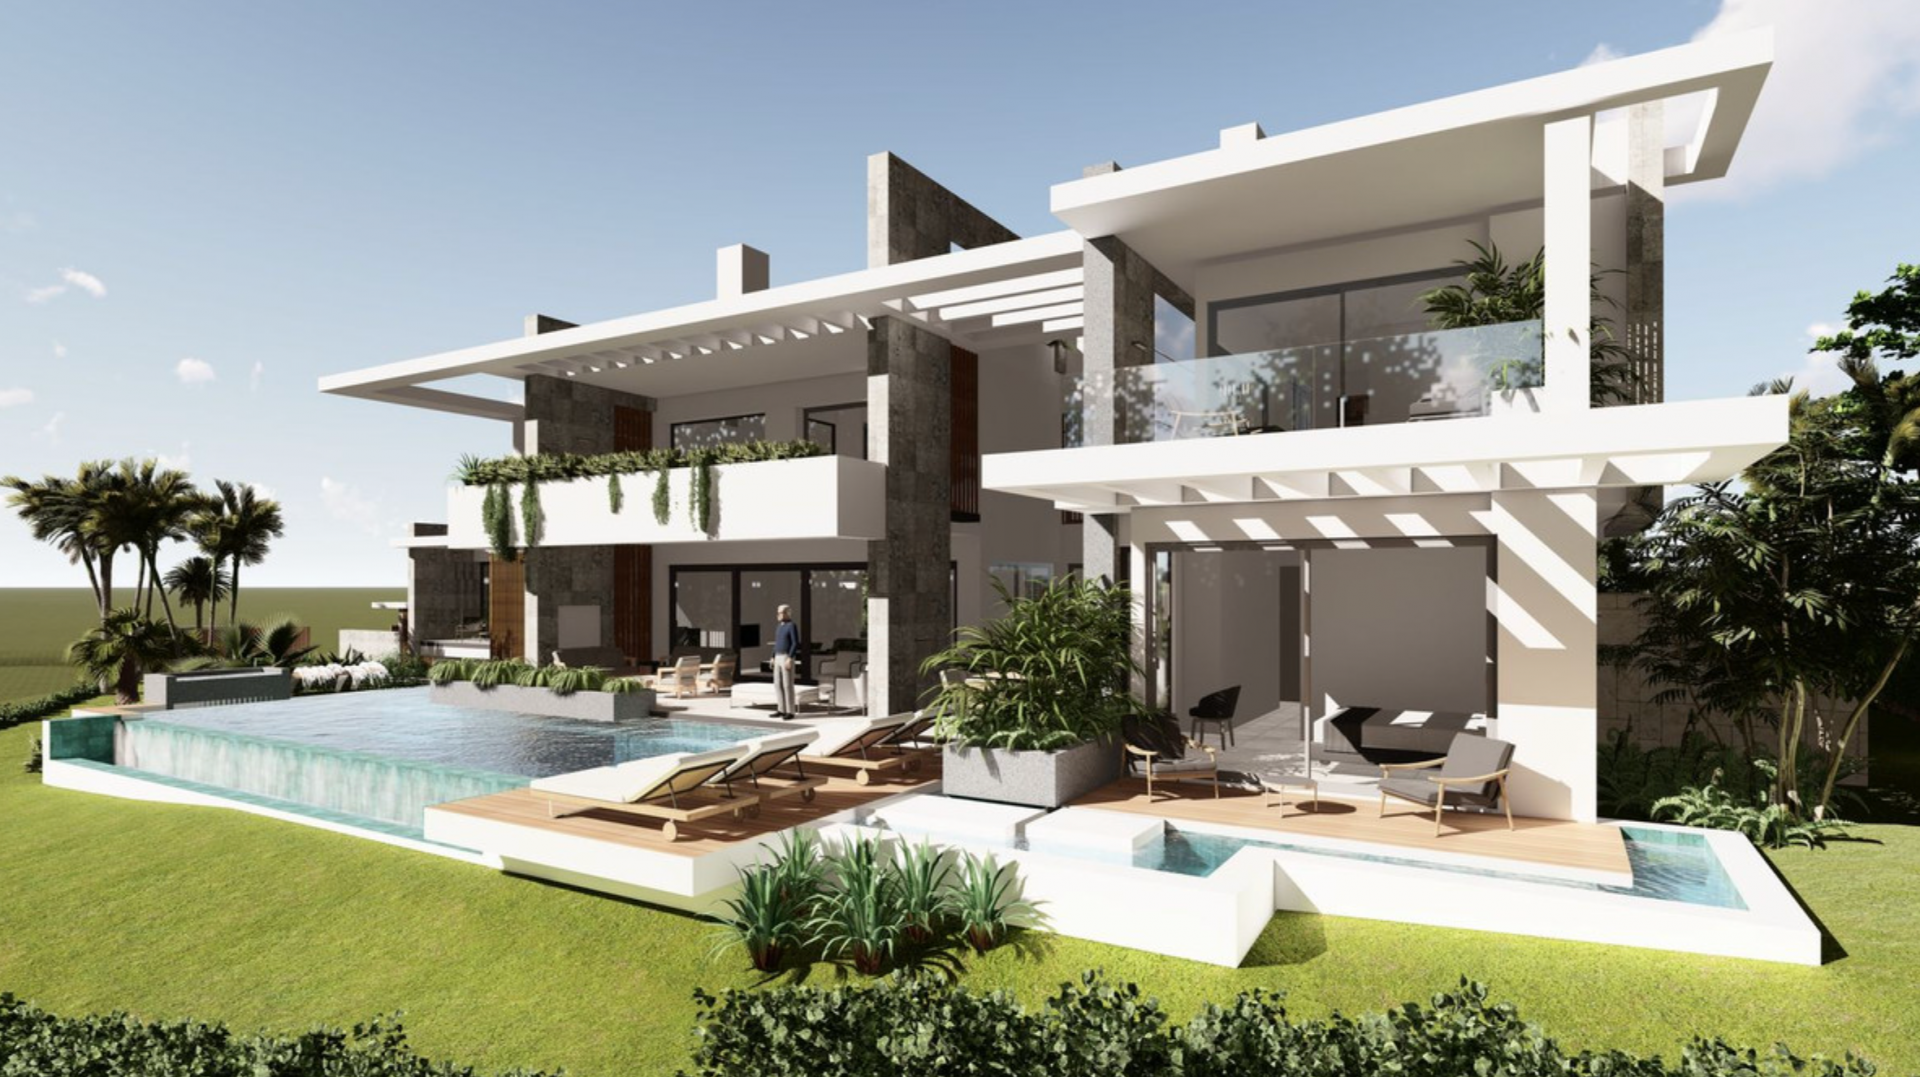 Plot in Guadalmina Baja with project & license, ready to build a luxury villa